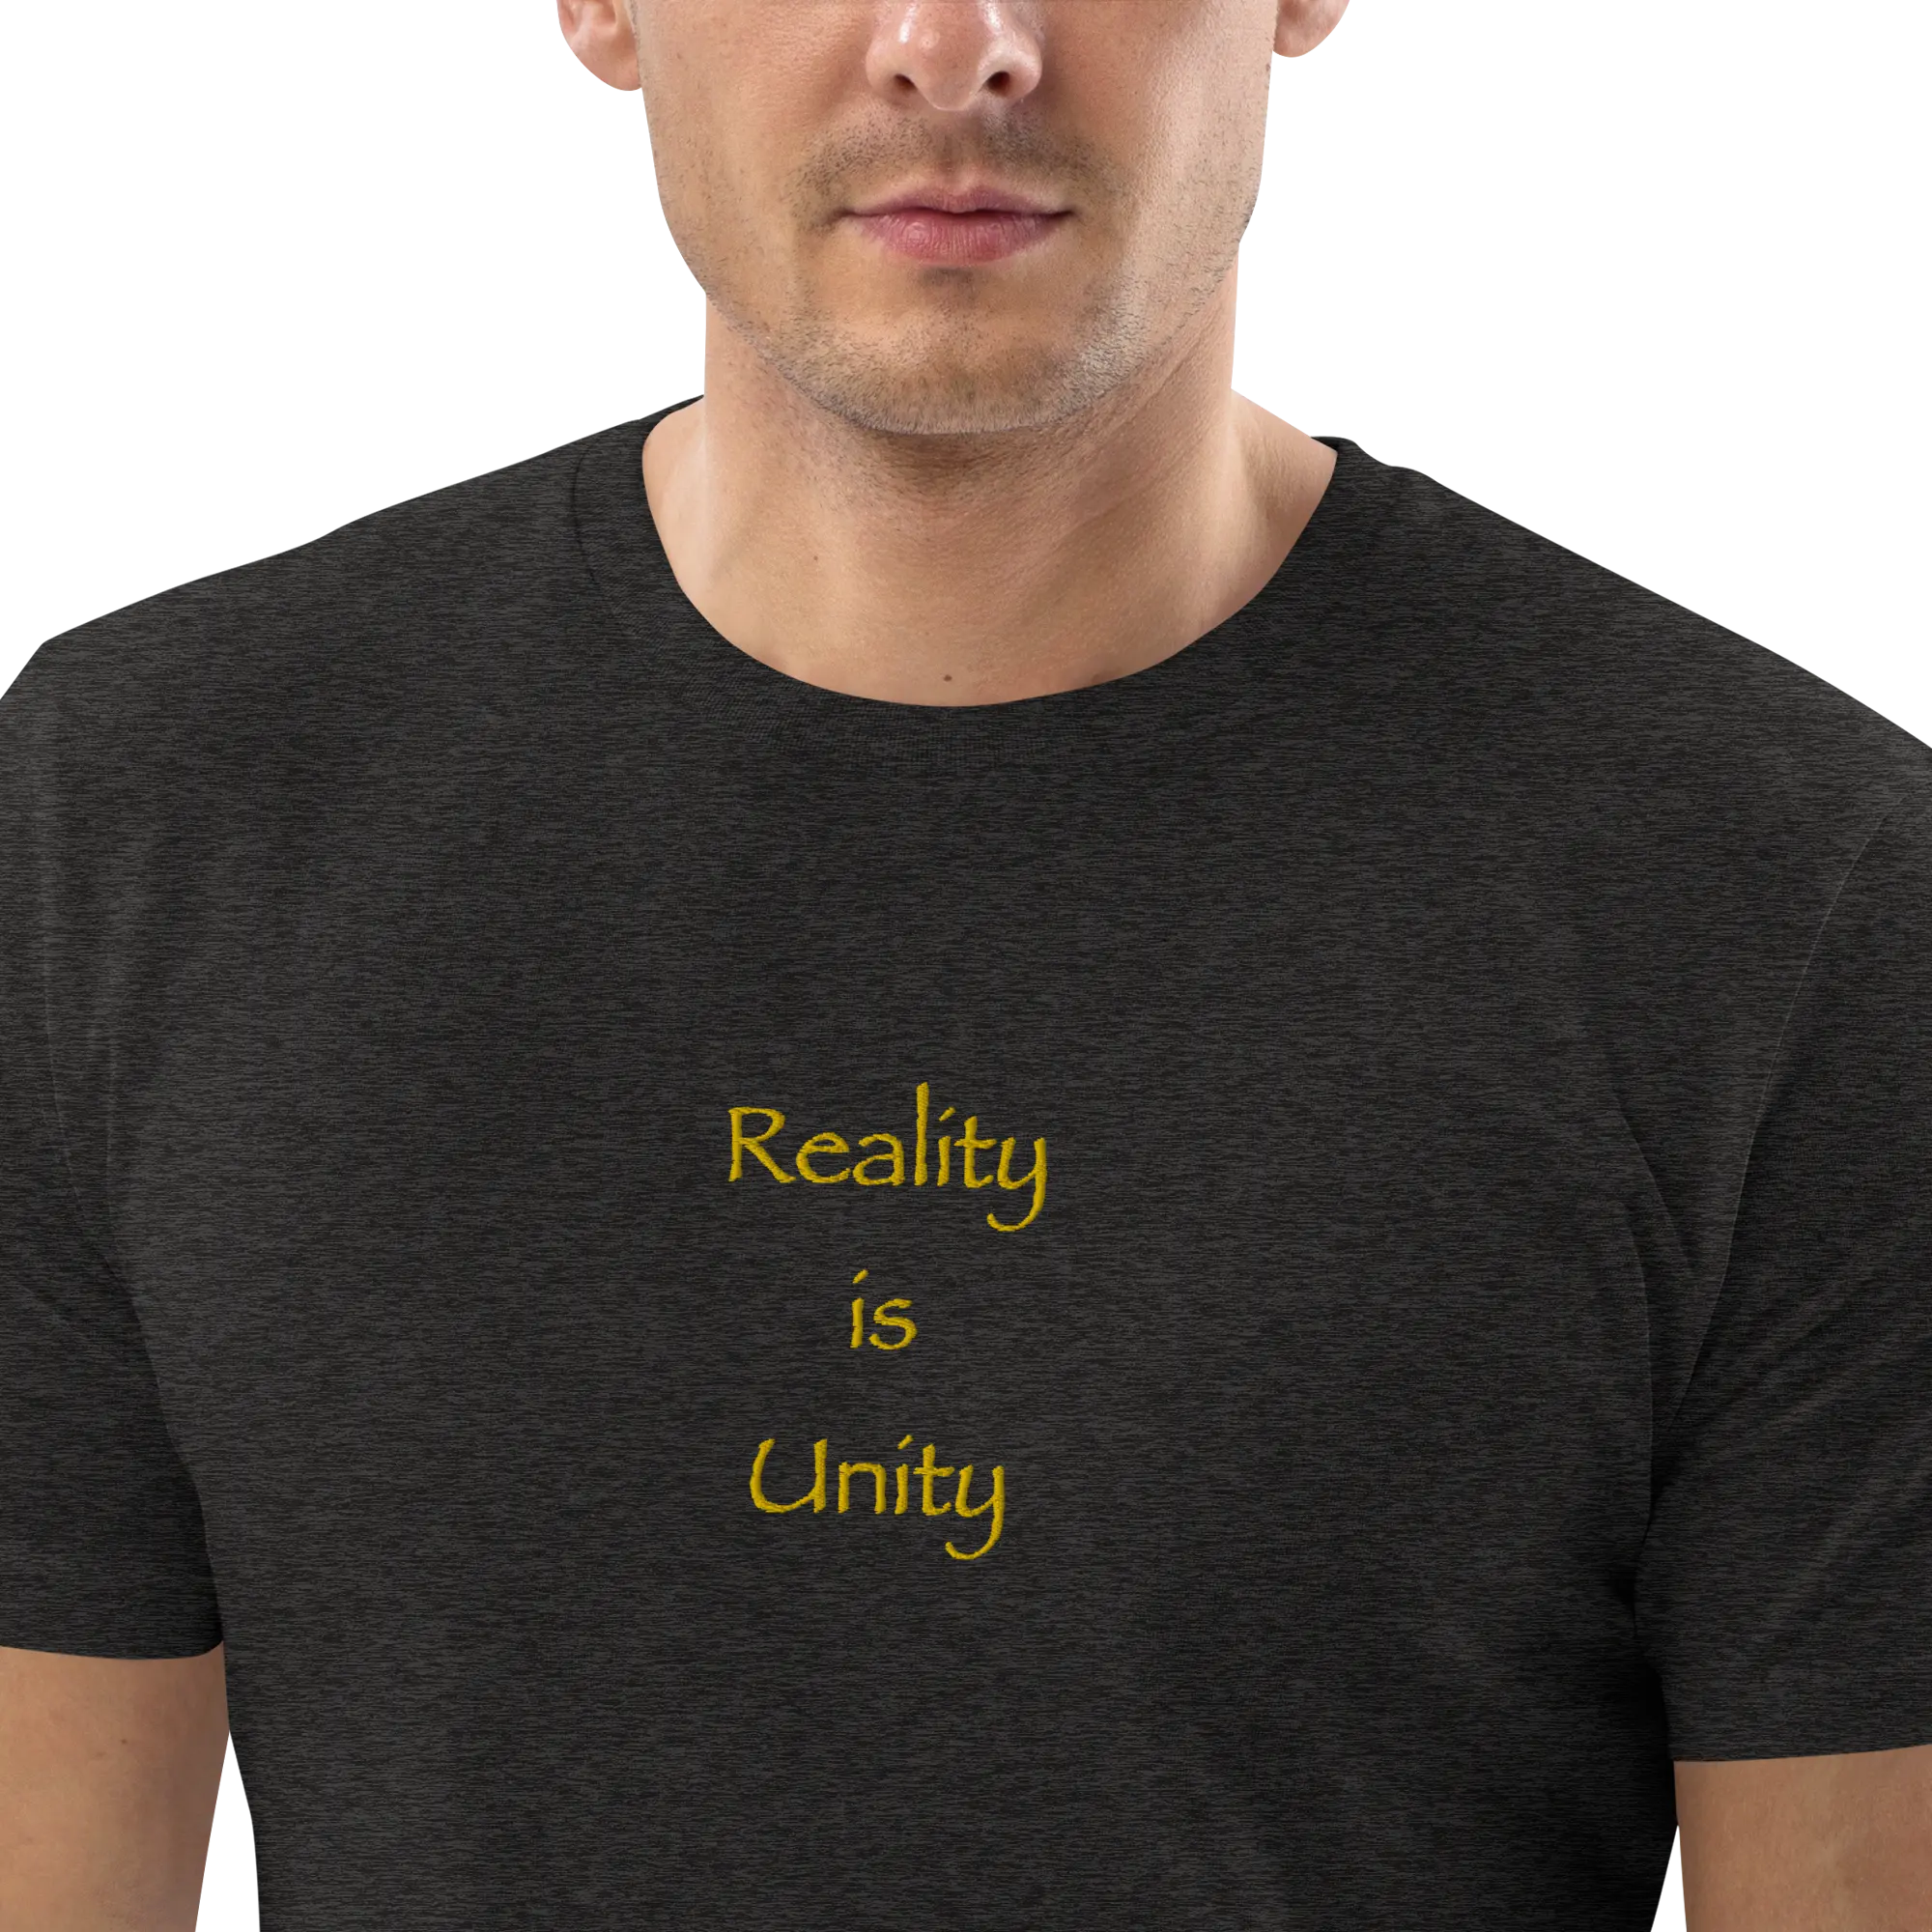 100% Organic Cotton ⋅ Gold Reality is Unity Embroidery ⋅ Men's T-Shirt ⋅ Black